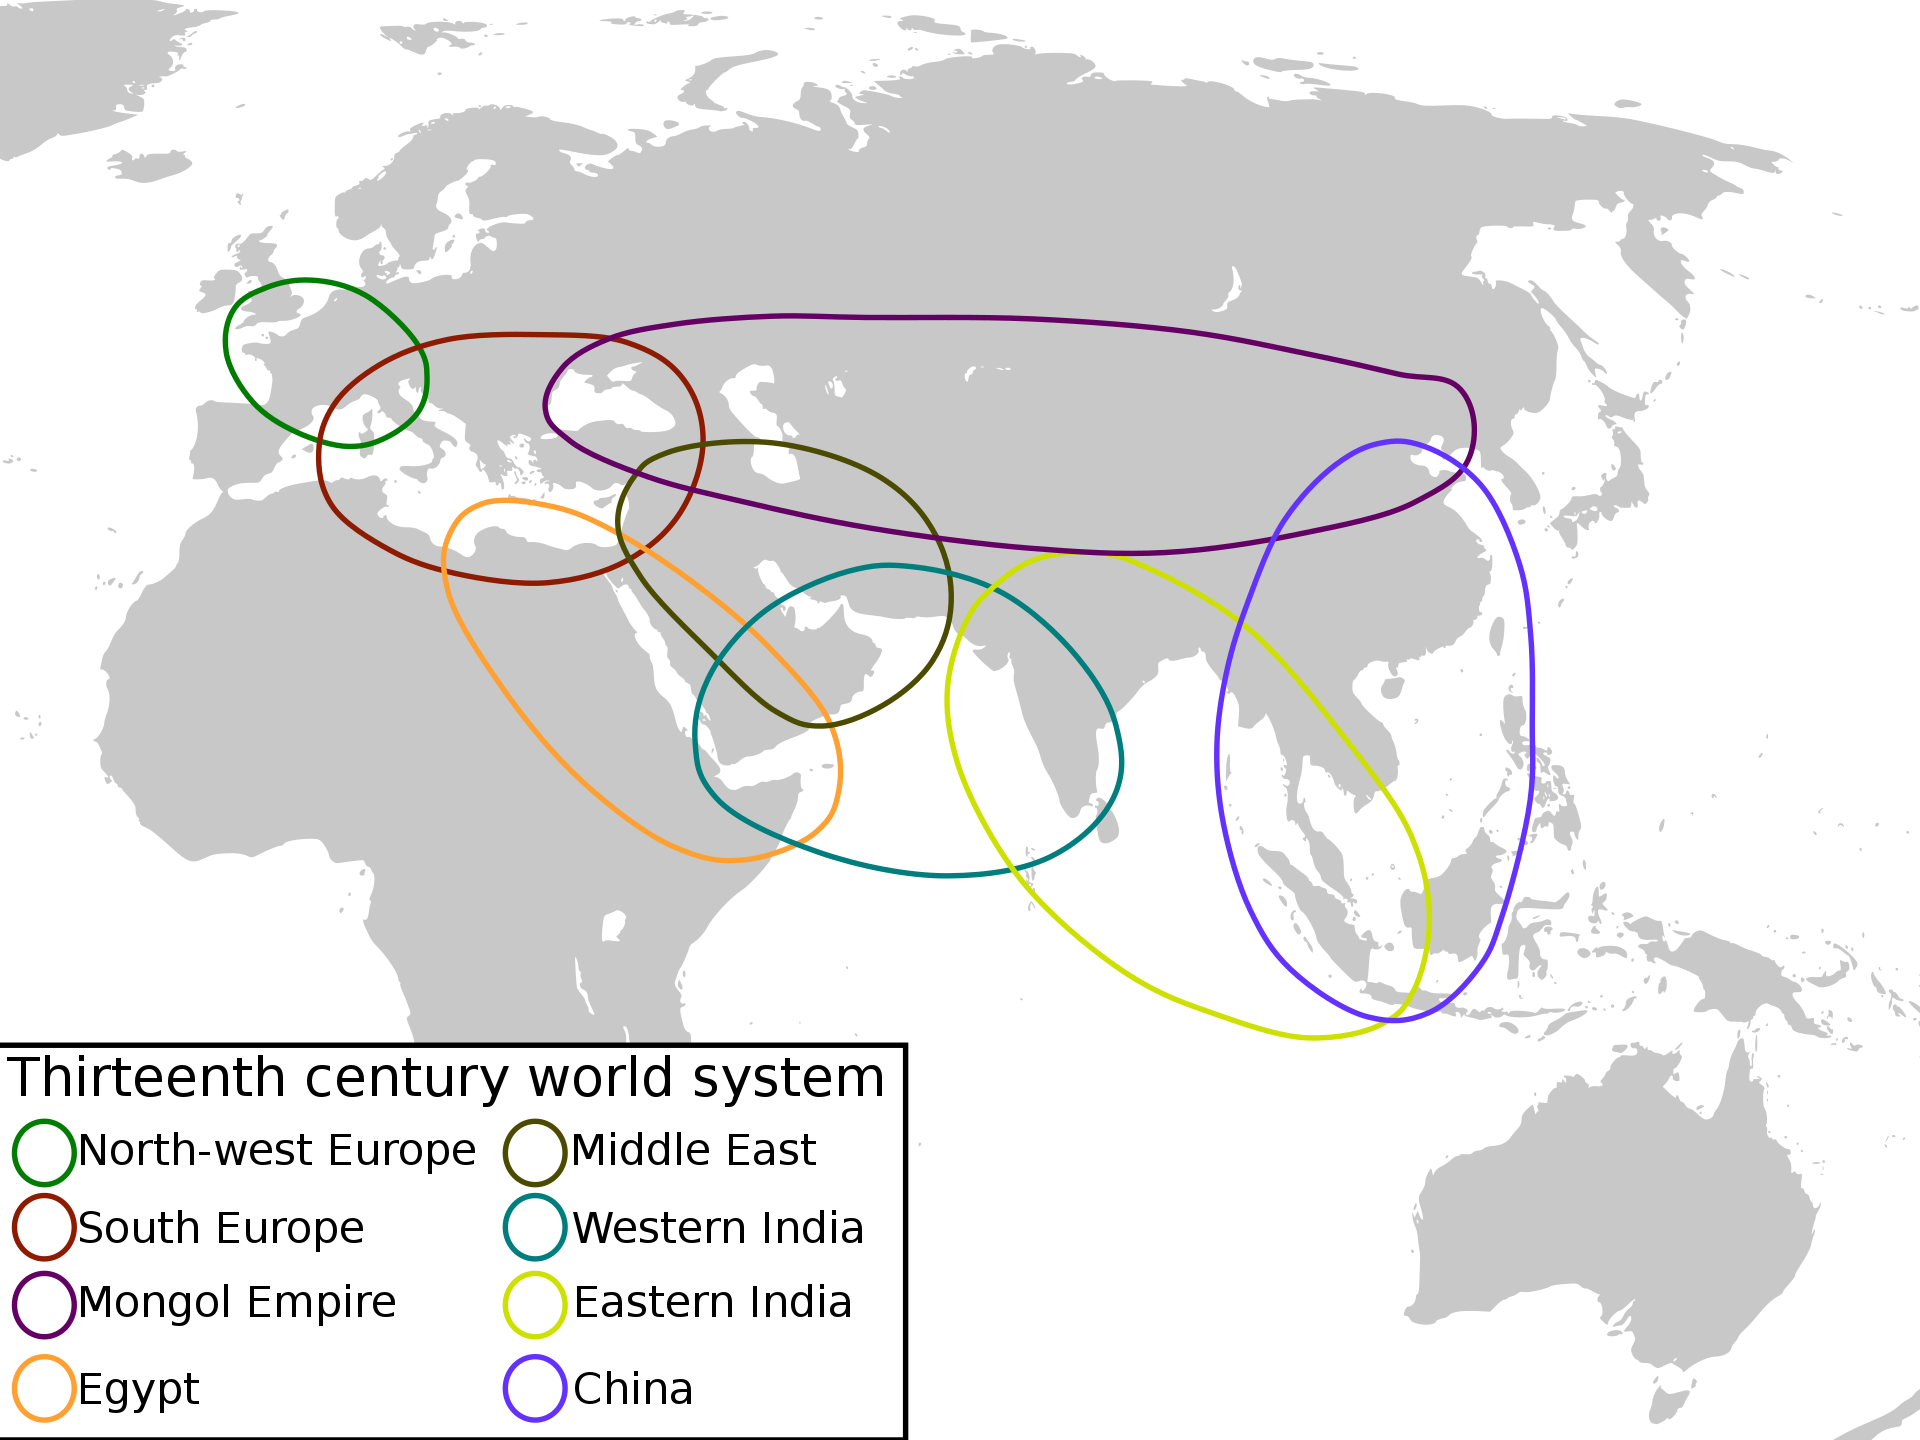 Map of Afro-Eurasia shows how the world was linked via 8 trading networks of production and exchange in the thirteenth century. Details in text.